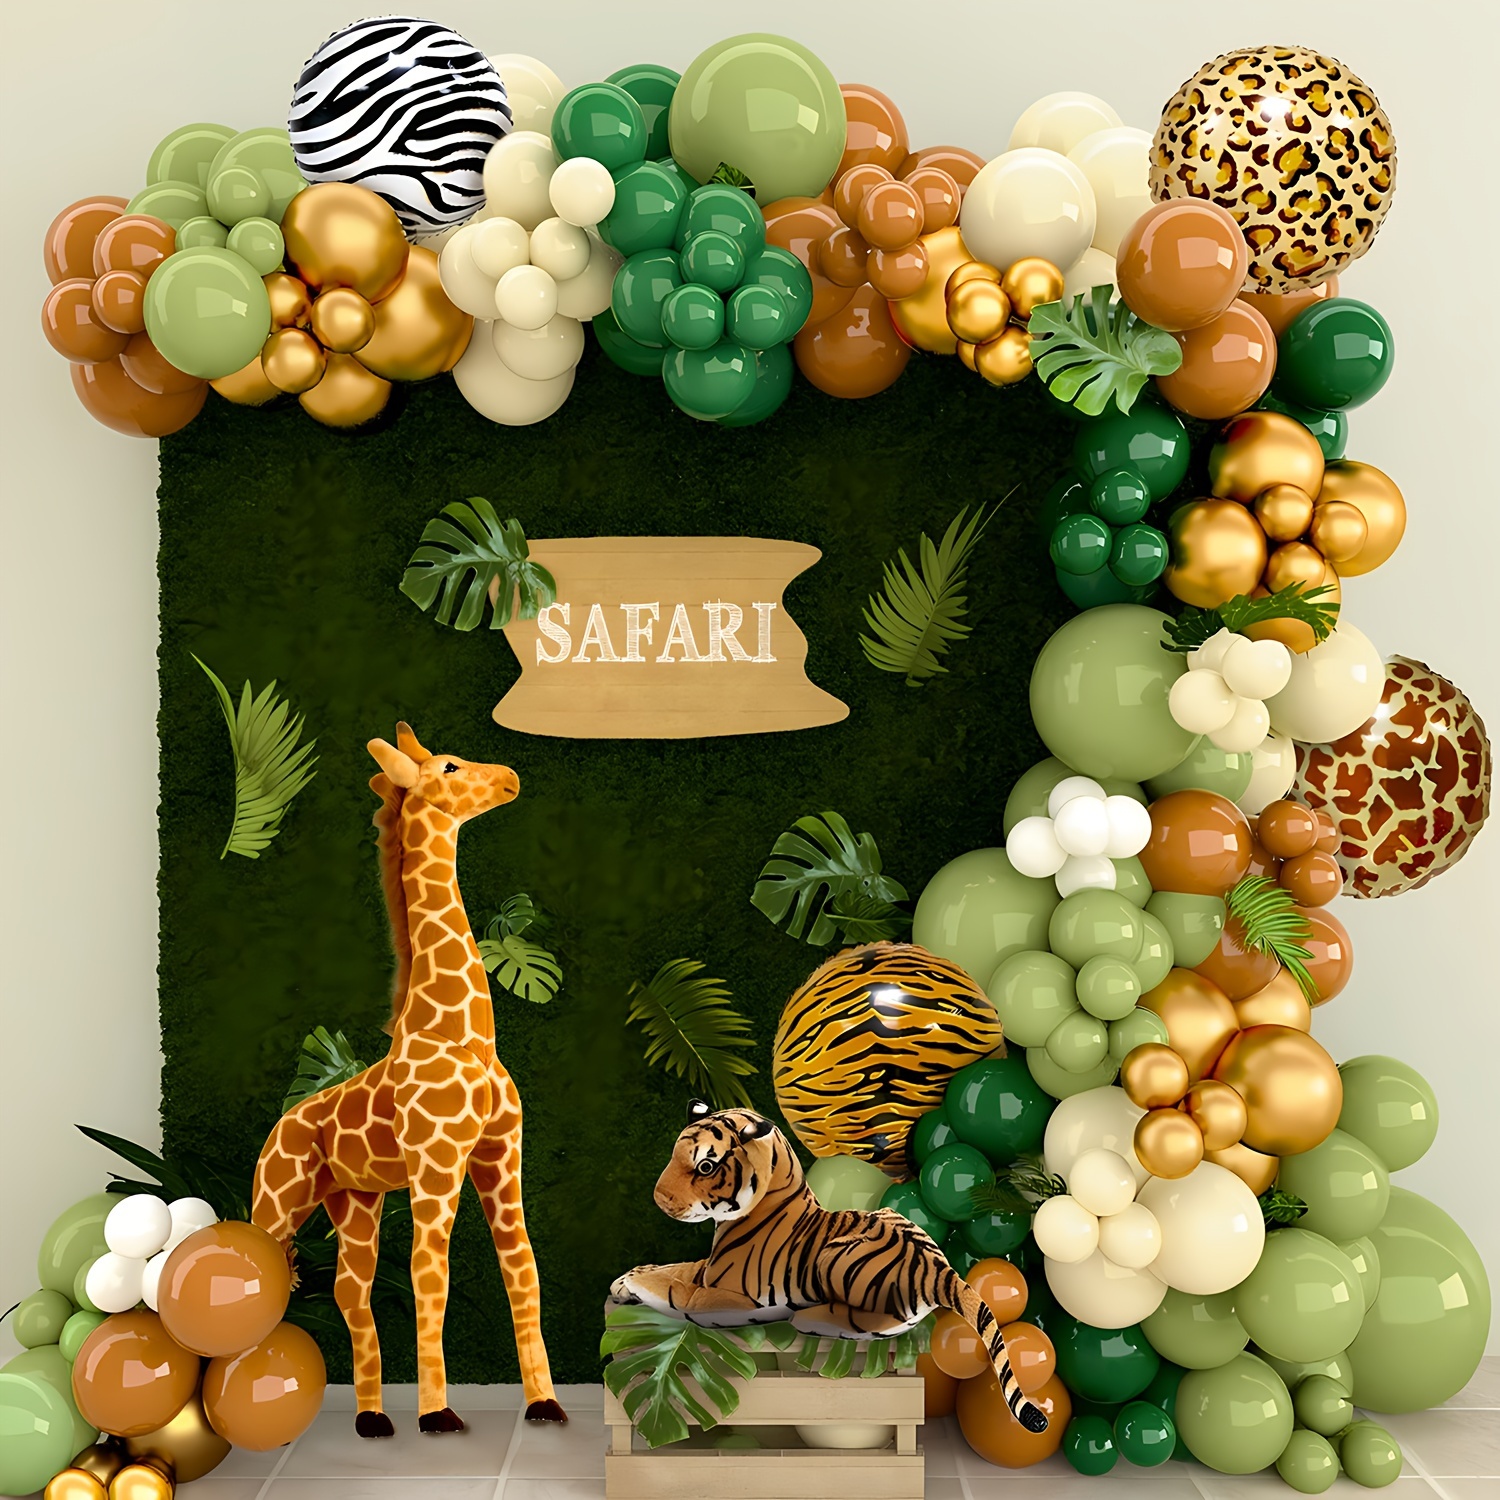 

Jungle Safari Animal Balloon Arch Kit, 127pcs Birthday Party & Baby Shower Decorations, Tiger Giraffe Zebra Leopard Print Foil Balloons, Biodegradable Latex Balloons With Tape & Tying Tool Included.